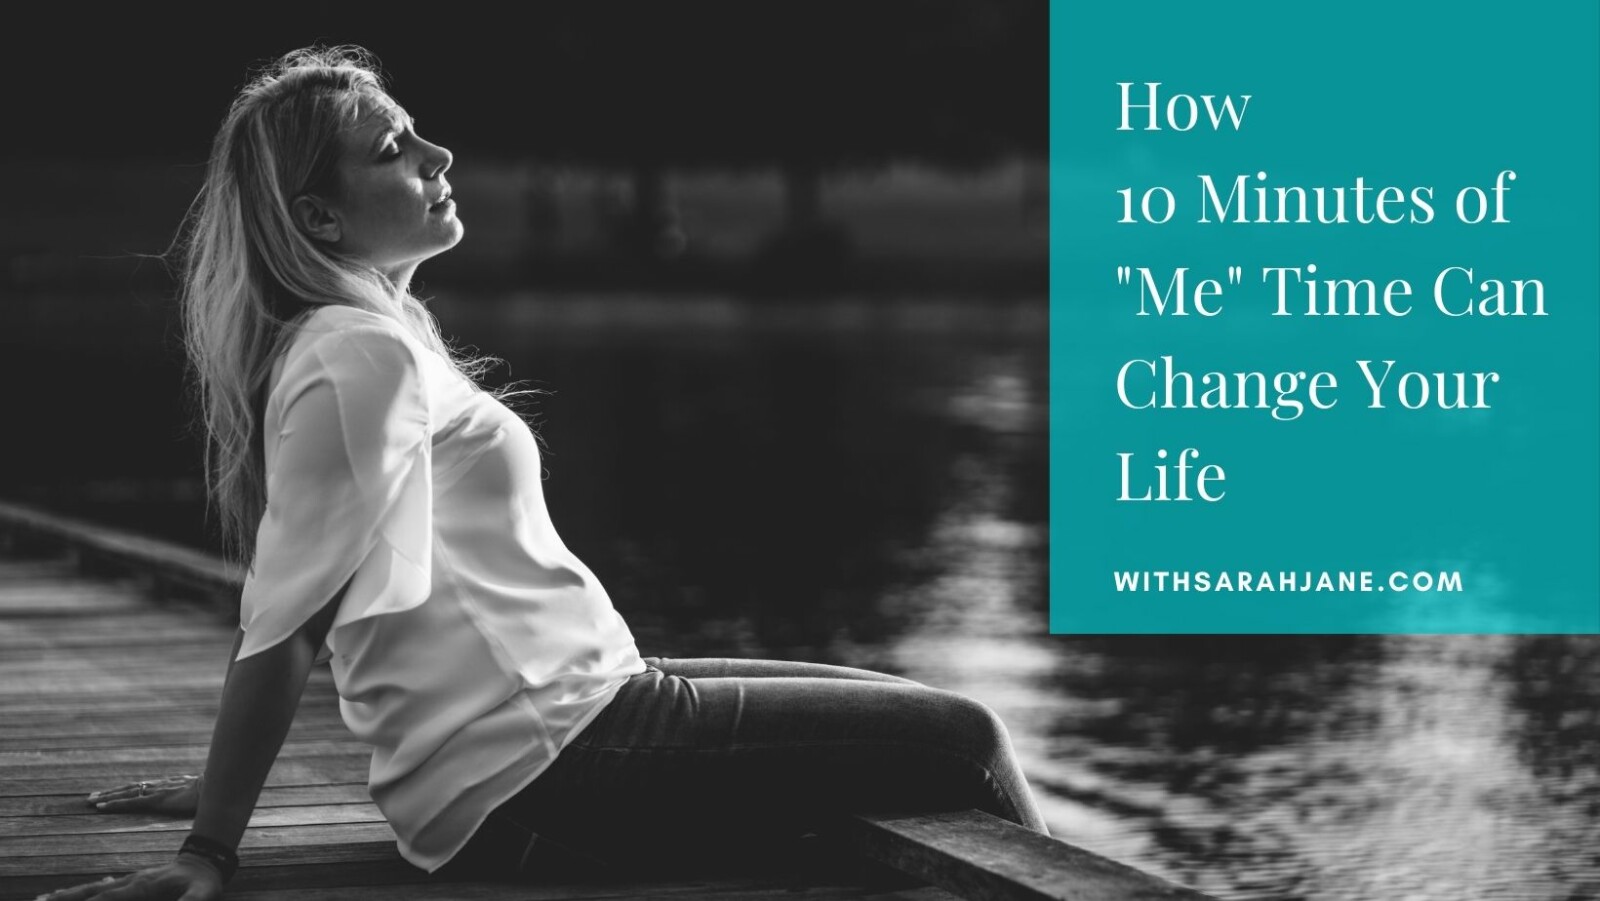 How 10 Minutes of “Me” Time Can Change Your Life